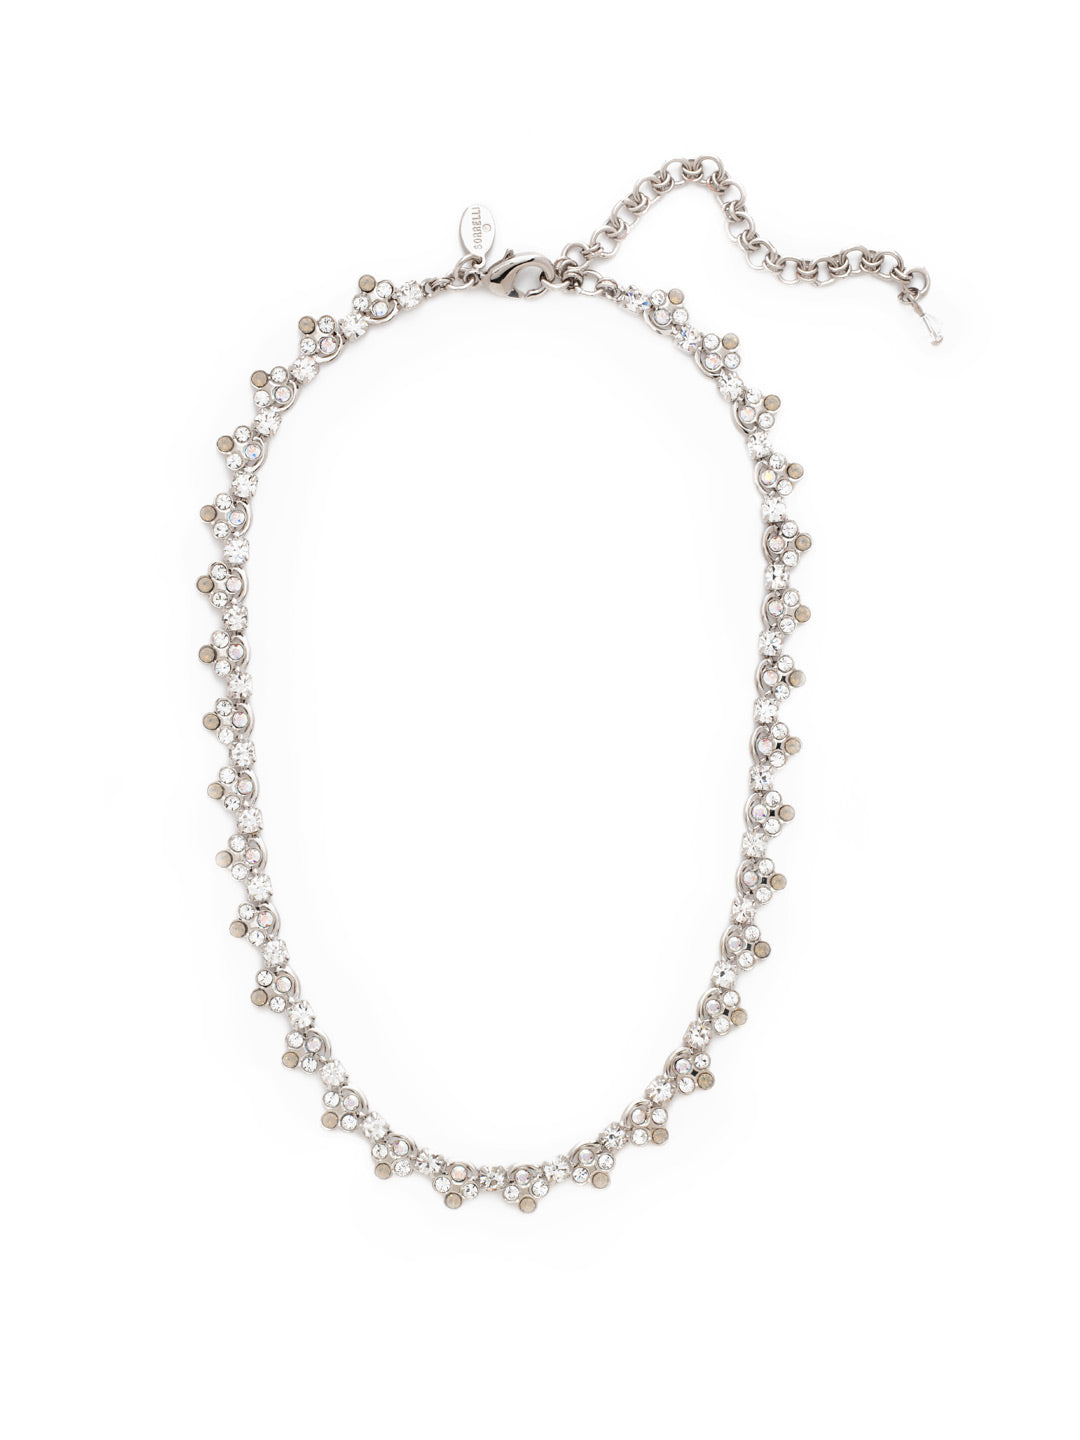 Luxe Lace Tennis Necklace - NAQ20RHWBR - <p>A tried and true classic! Our Luxe Lace Necklace features round crystals in a clover bezel, making it a Sorrelli must. From Sorrelli's White Bridal collection in our Palladium Silver-tone finish.</p>